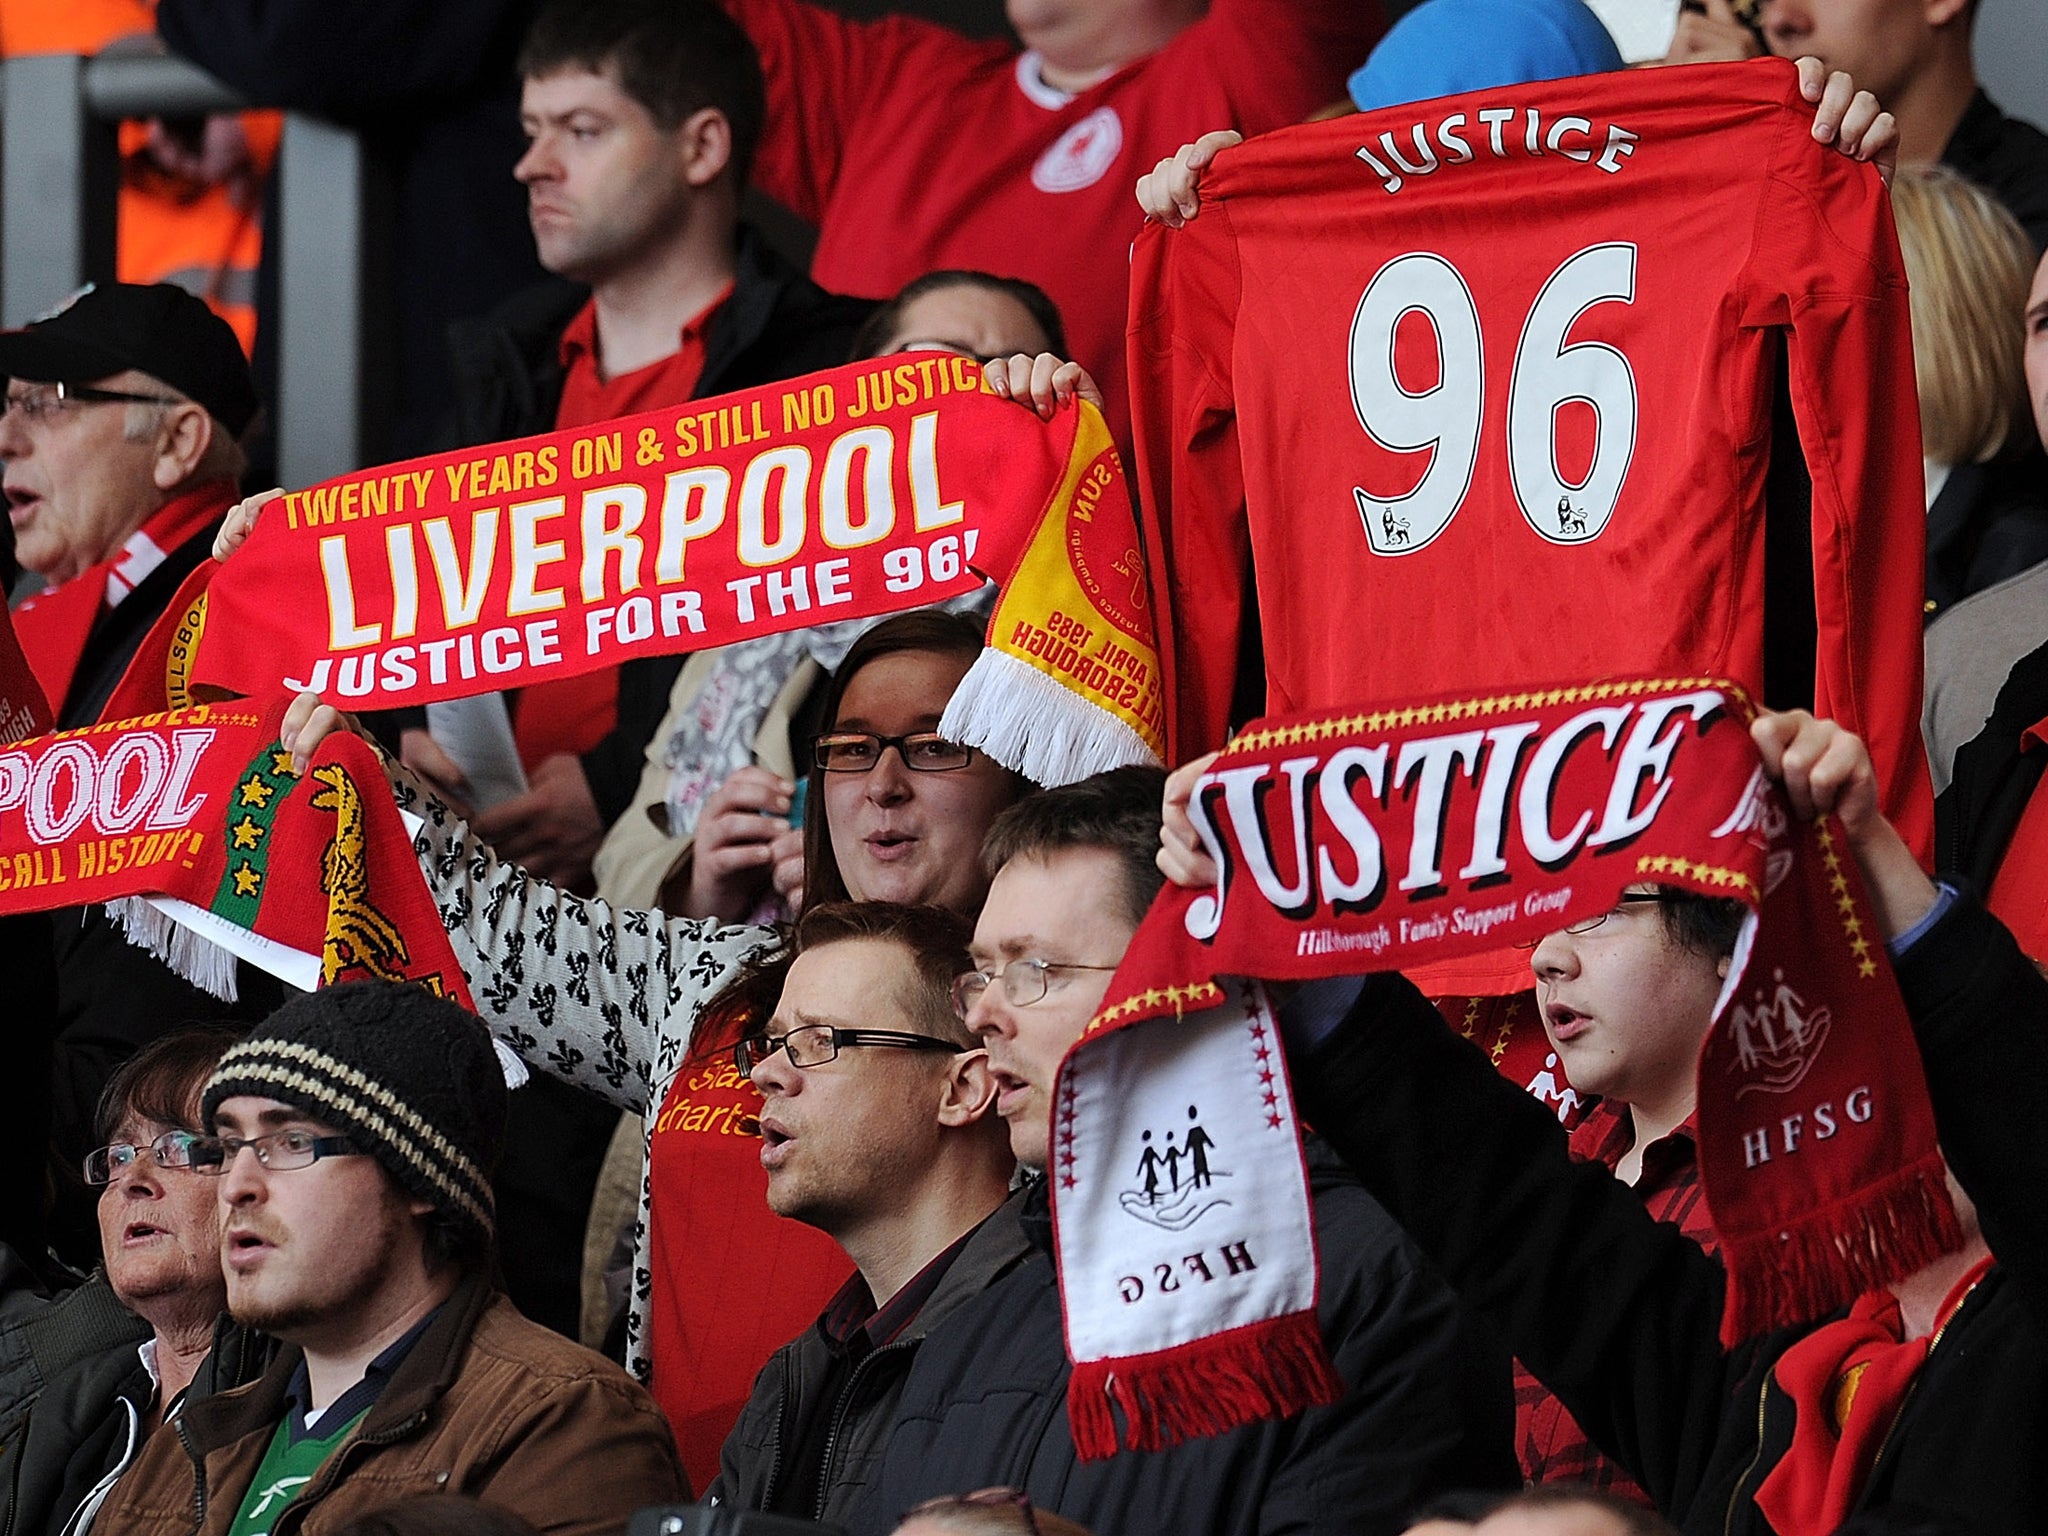 Matches will kick-off seven minutes later to mark the 25th anniversary of the Hillsborough disaster